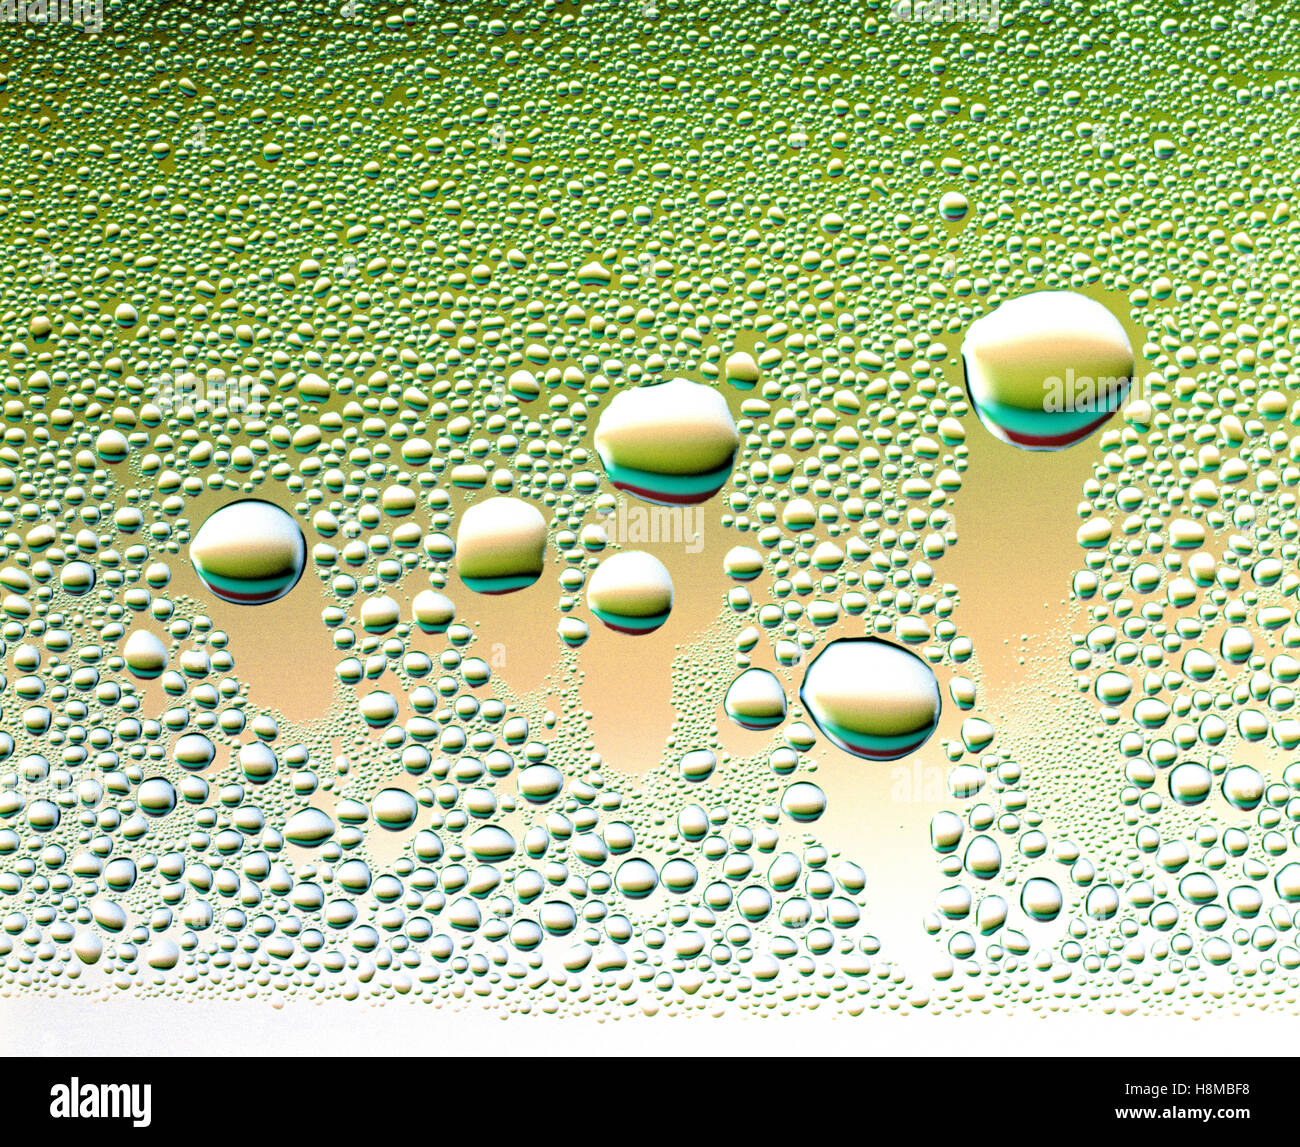 Green Water Droplets Stock Photo